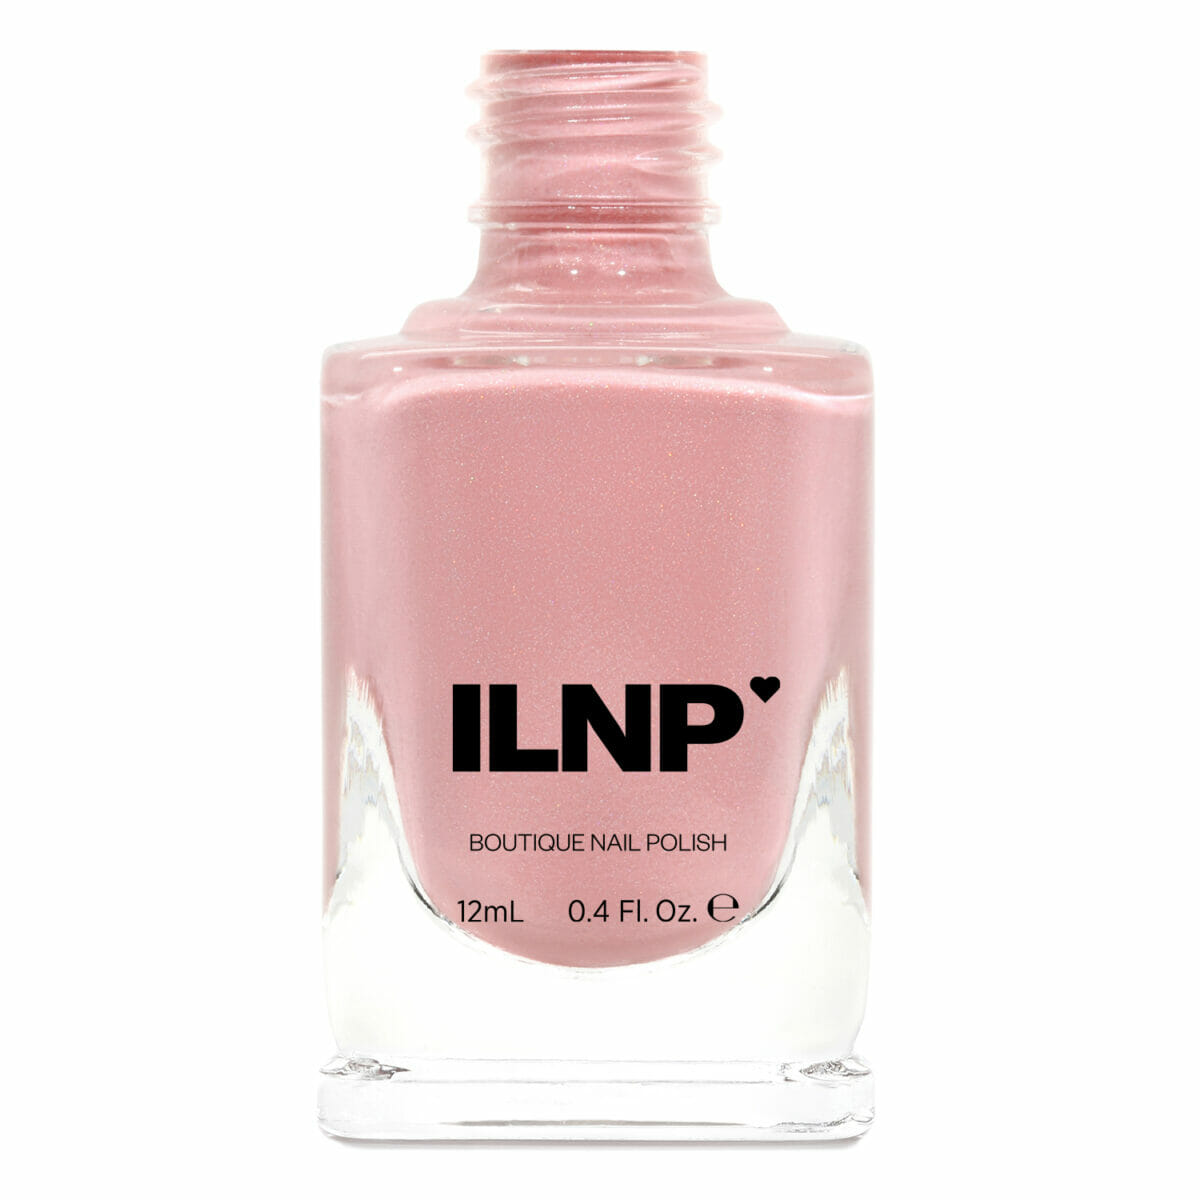 Full Bloom - Creamy Peachy Pink Holographic Nail Polish by ILNP